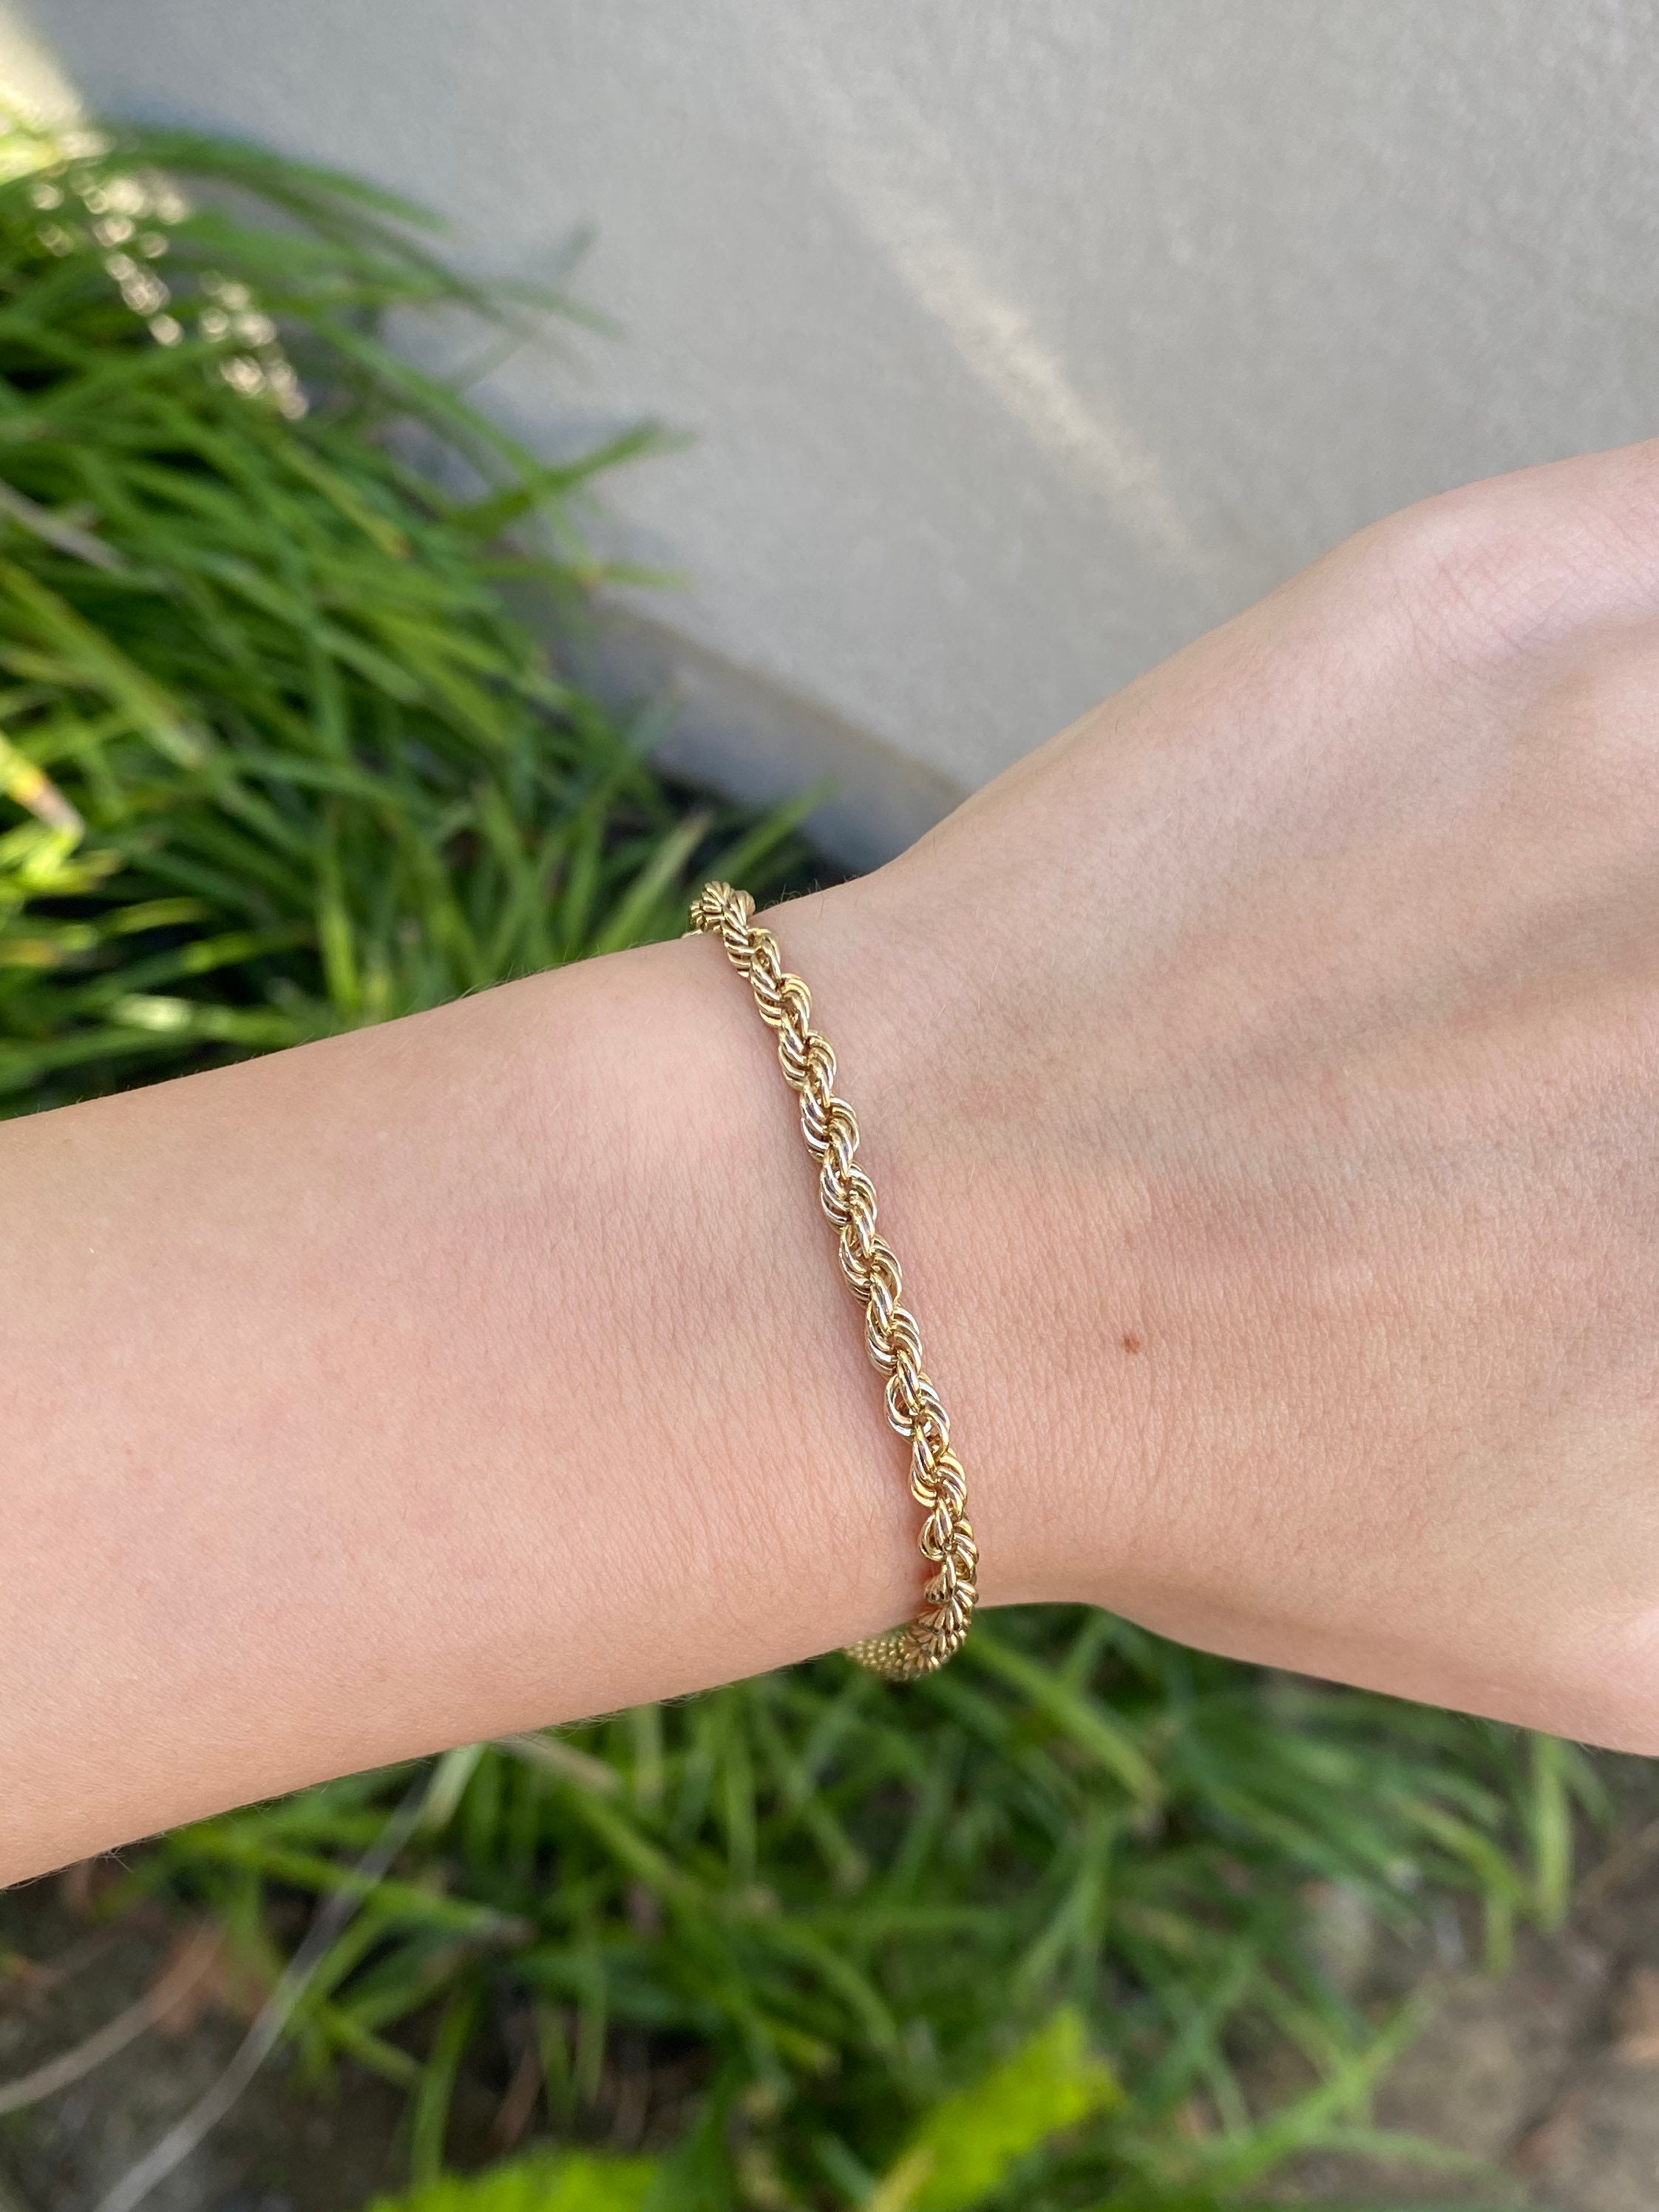 Vintage Solid 14k Yellow Gold Long Rope Chain Bracelet 8.5 